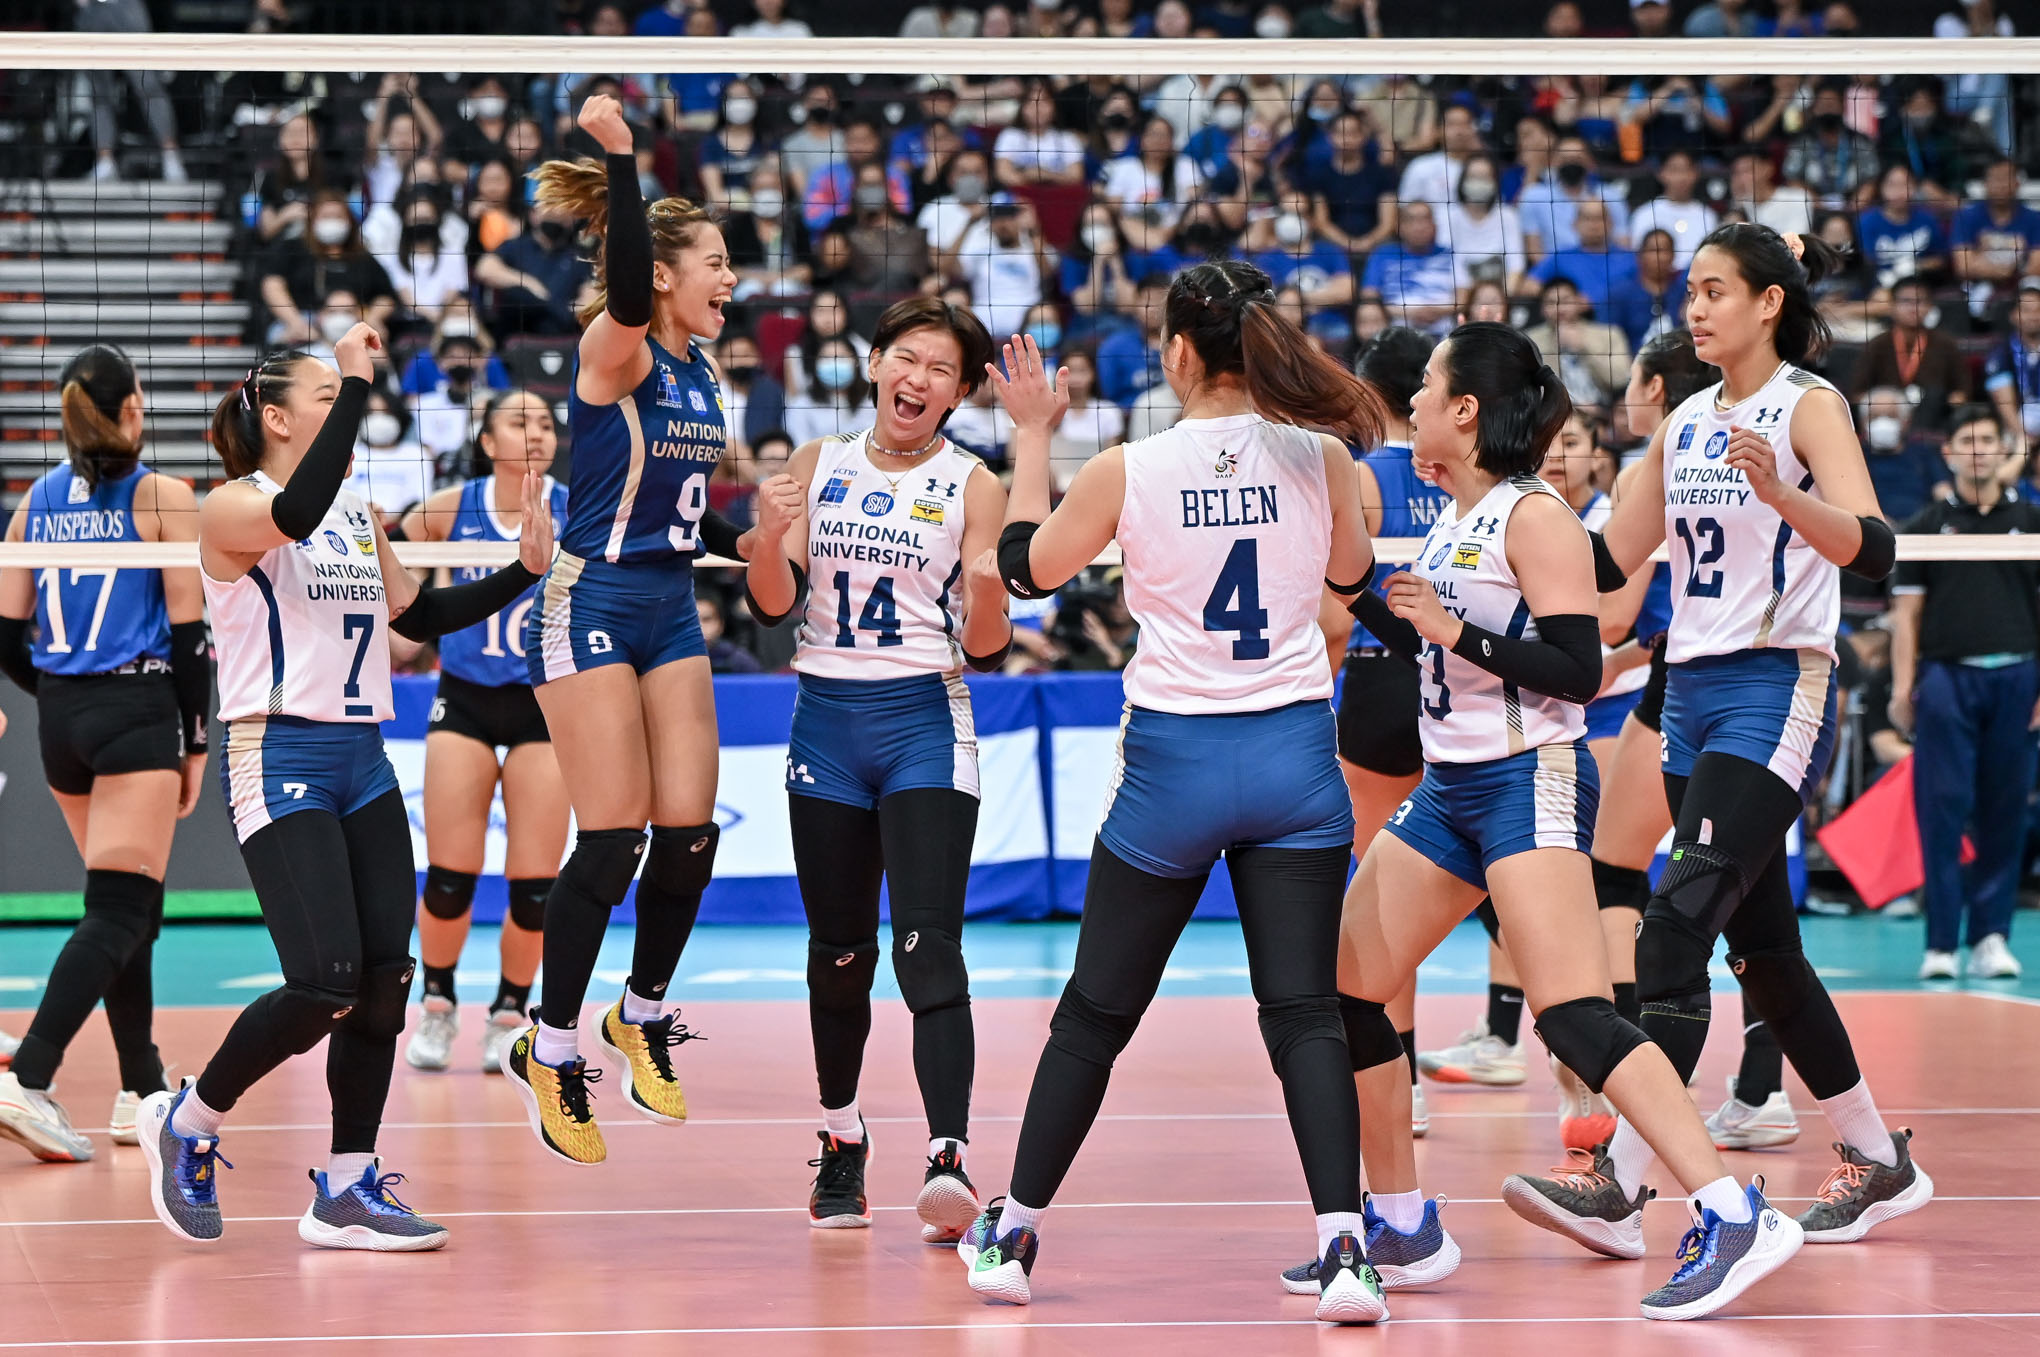 National U sweeps Ateneo to start UAAP title defense